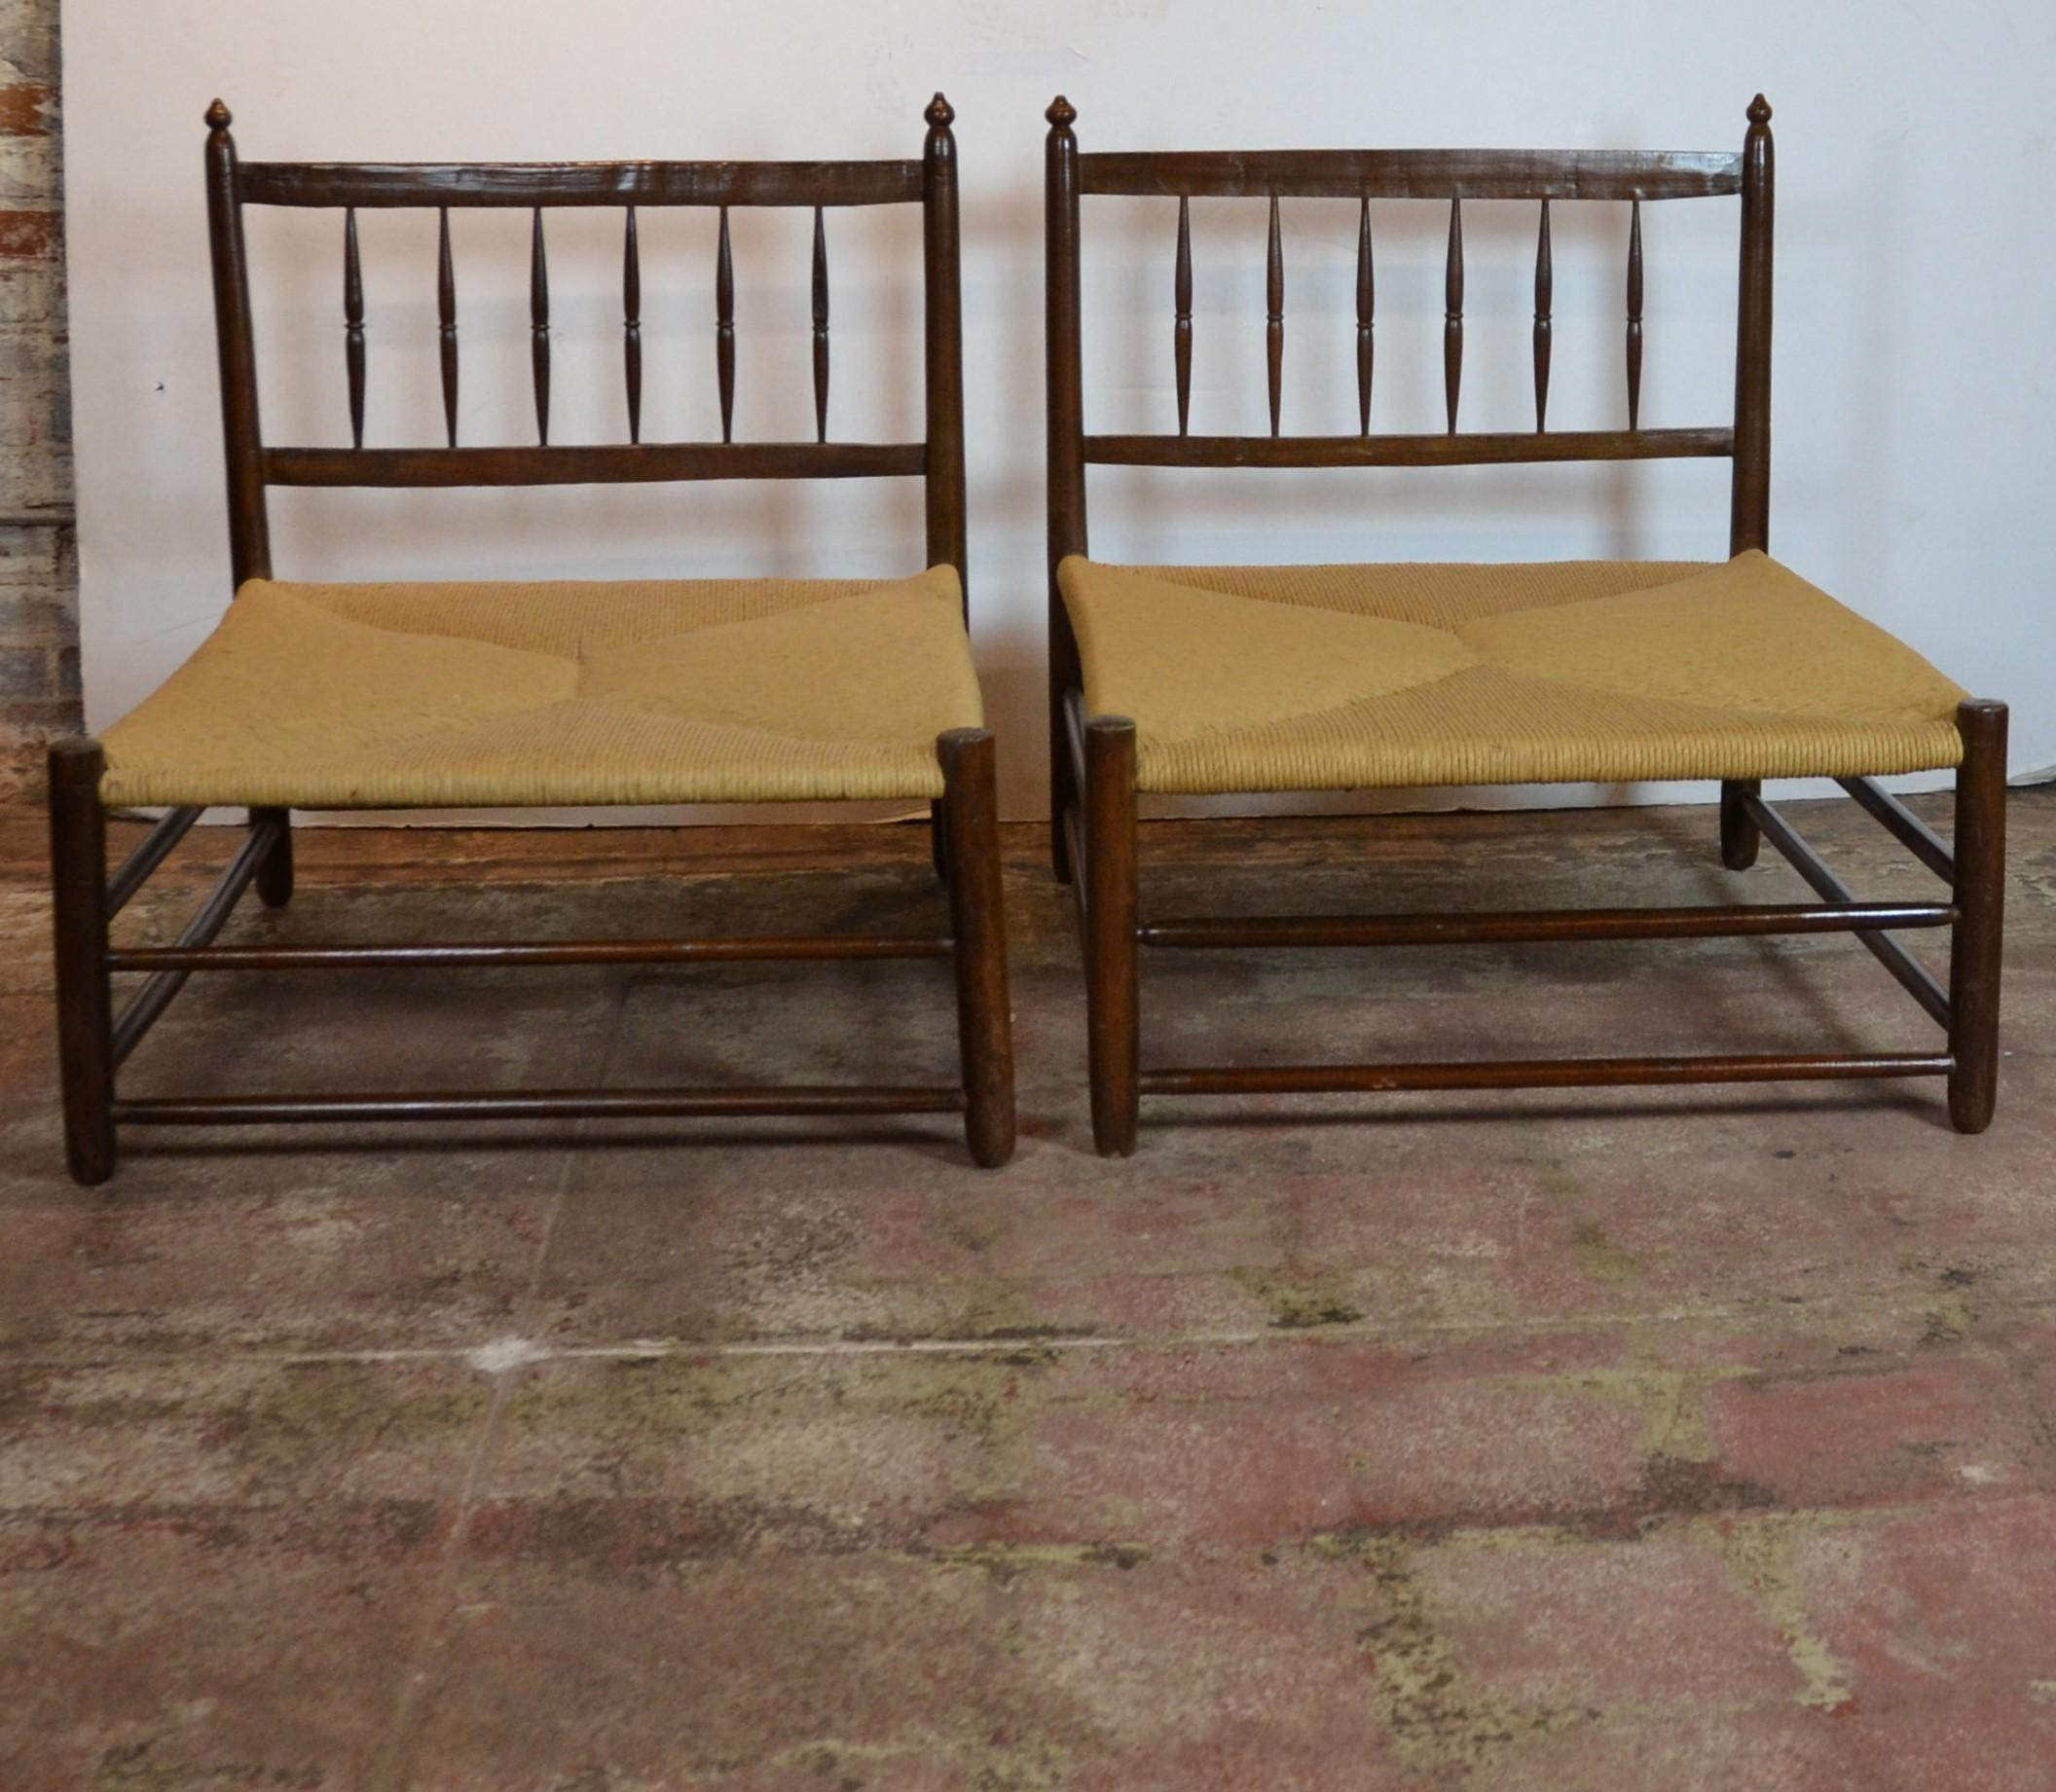 Pair of French woven seat club chairs. The loose cushions are filled with down. Excellent quality.